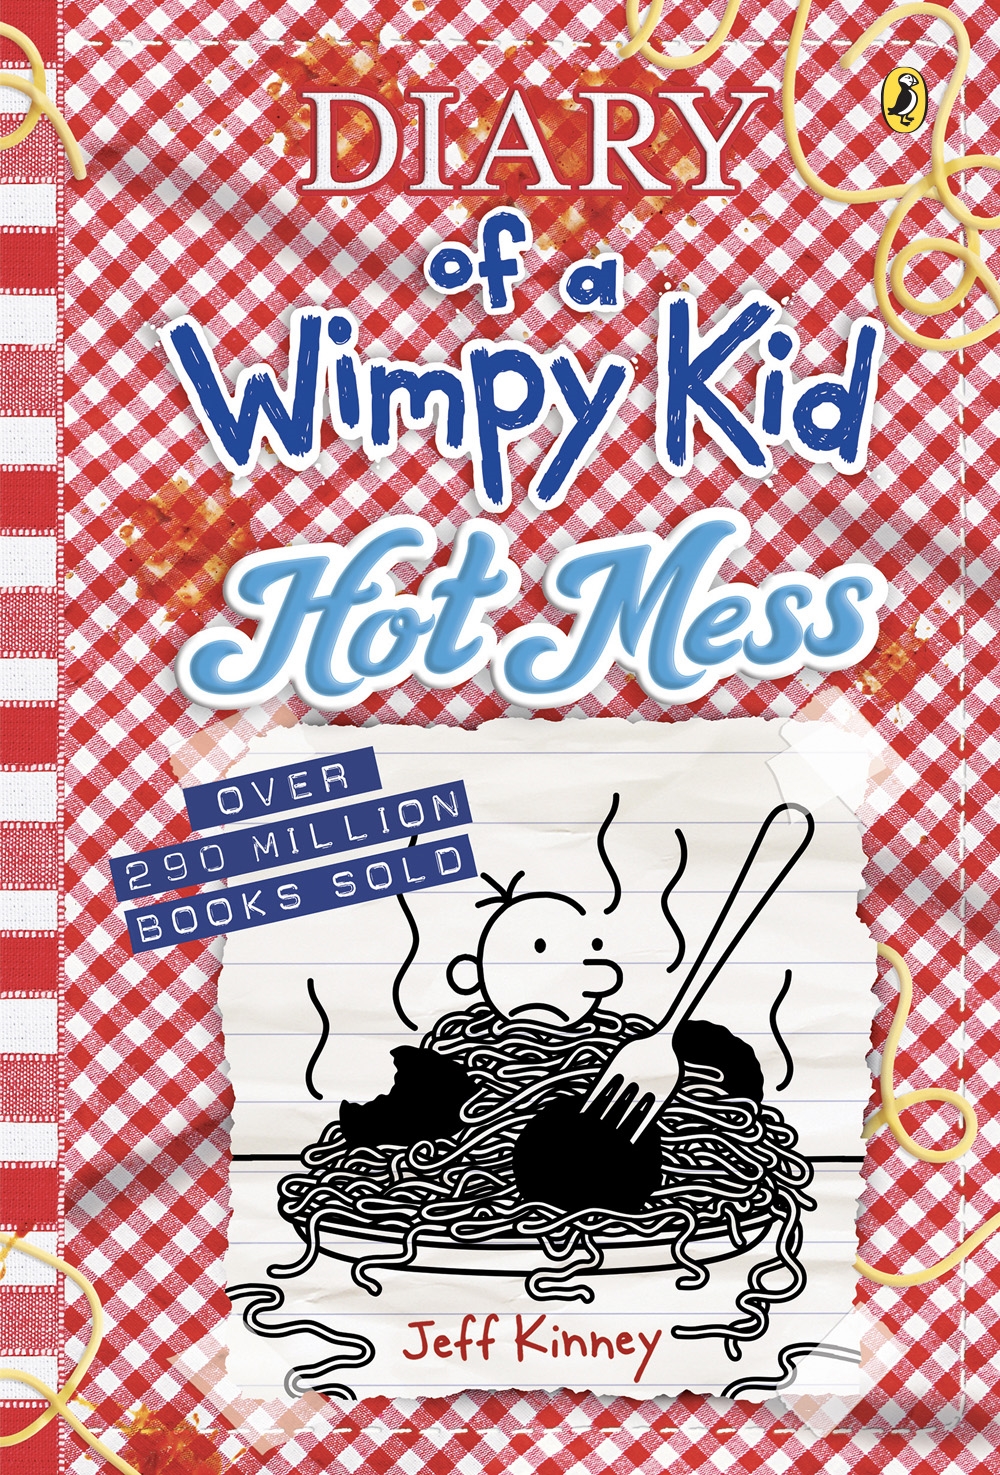 Hot Mess: Diary of a Wimpy Kid (19) by Jeff Kinney - Penguin Books New ...